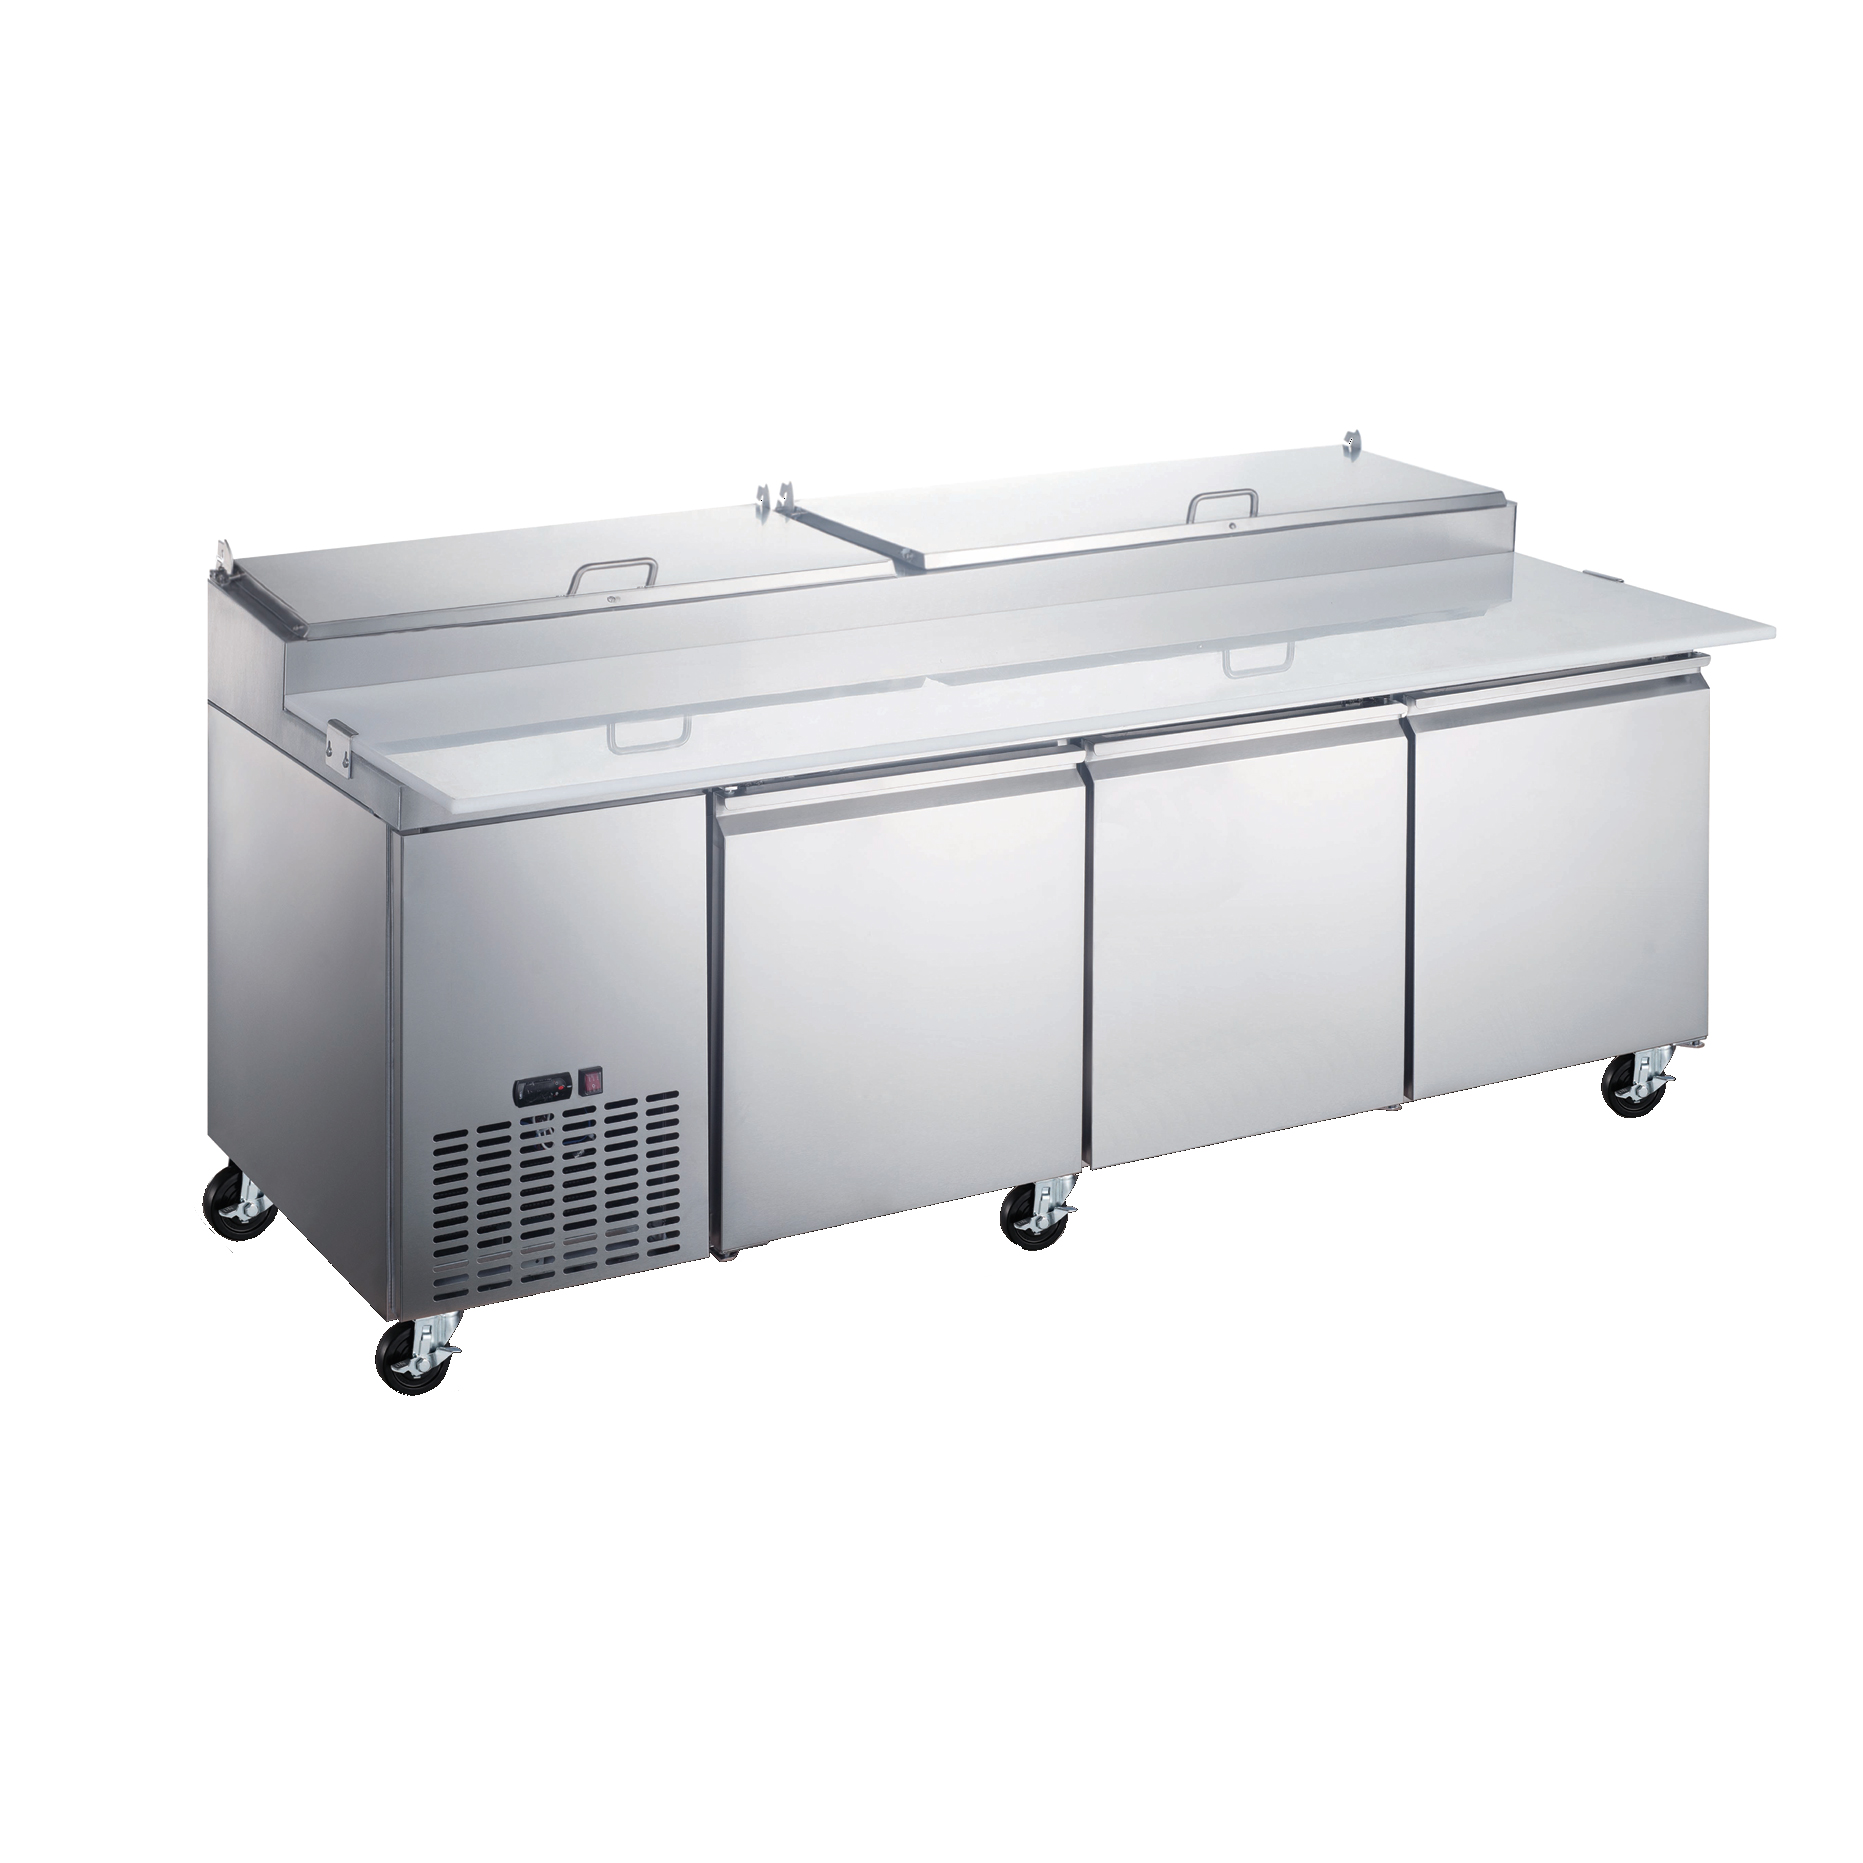 Omcan USA 50044 91″ Pizza Prep Table Refrigerated Counter